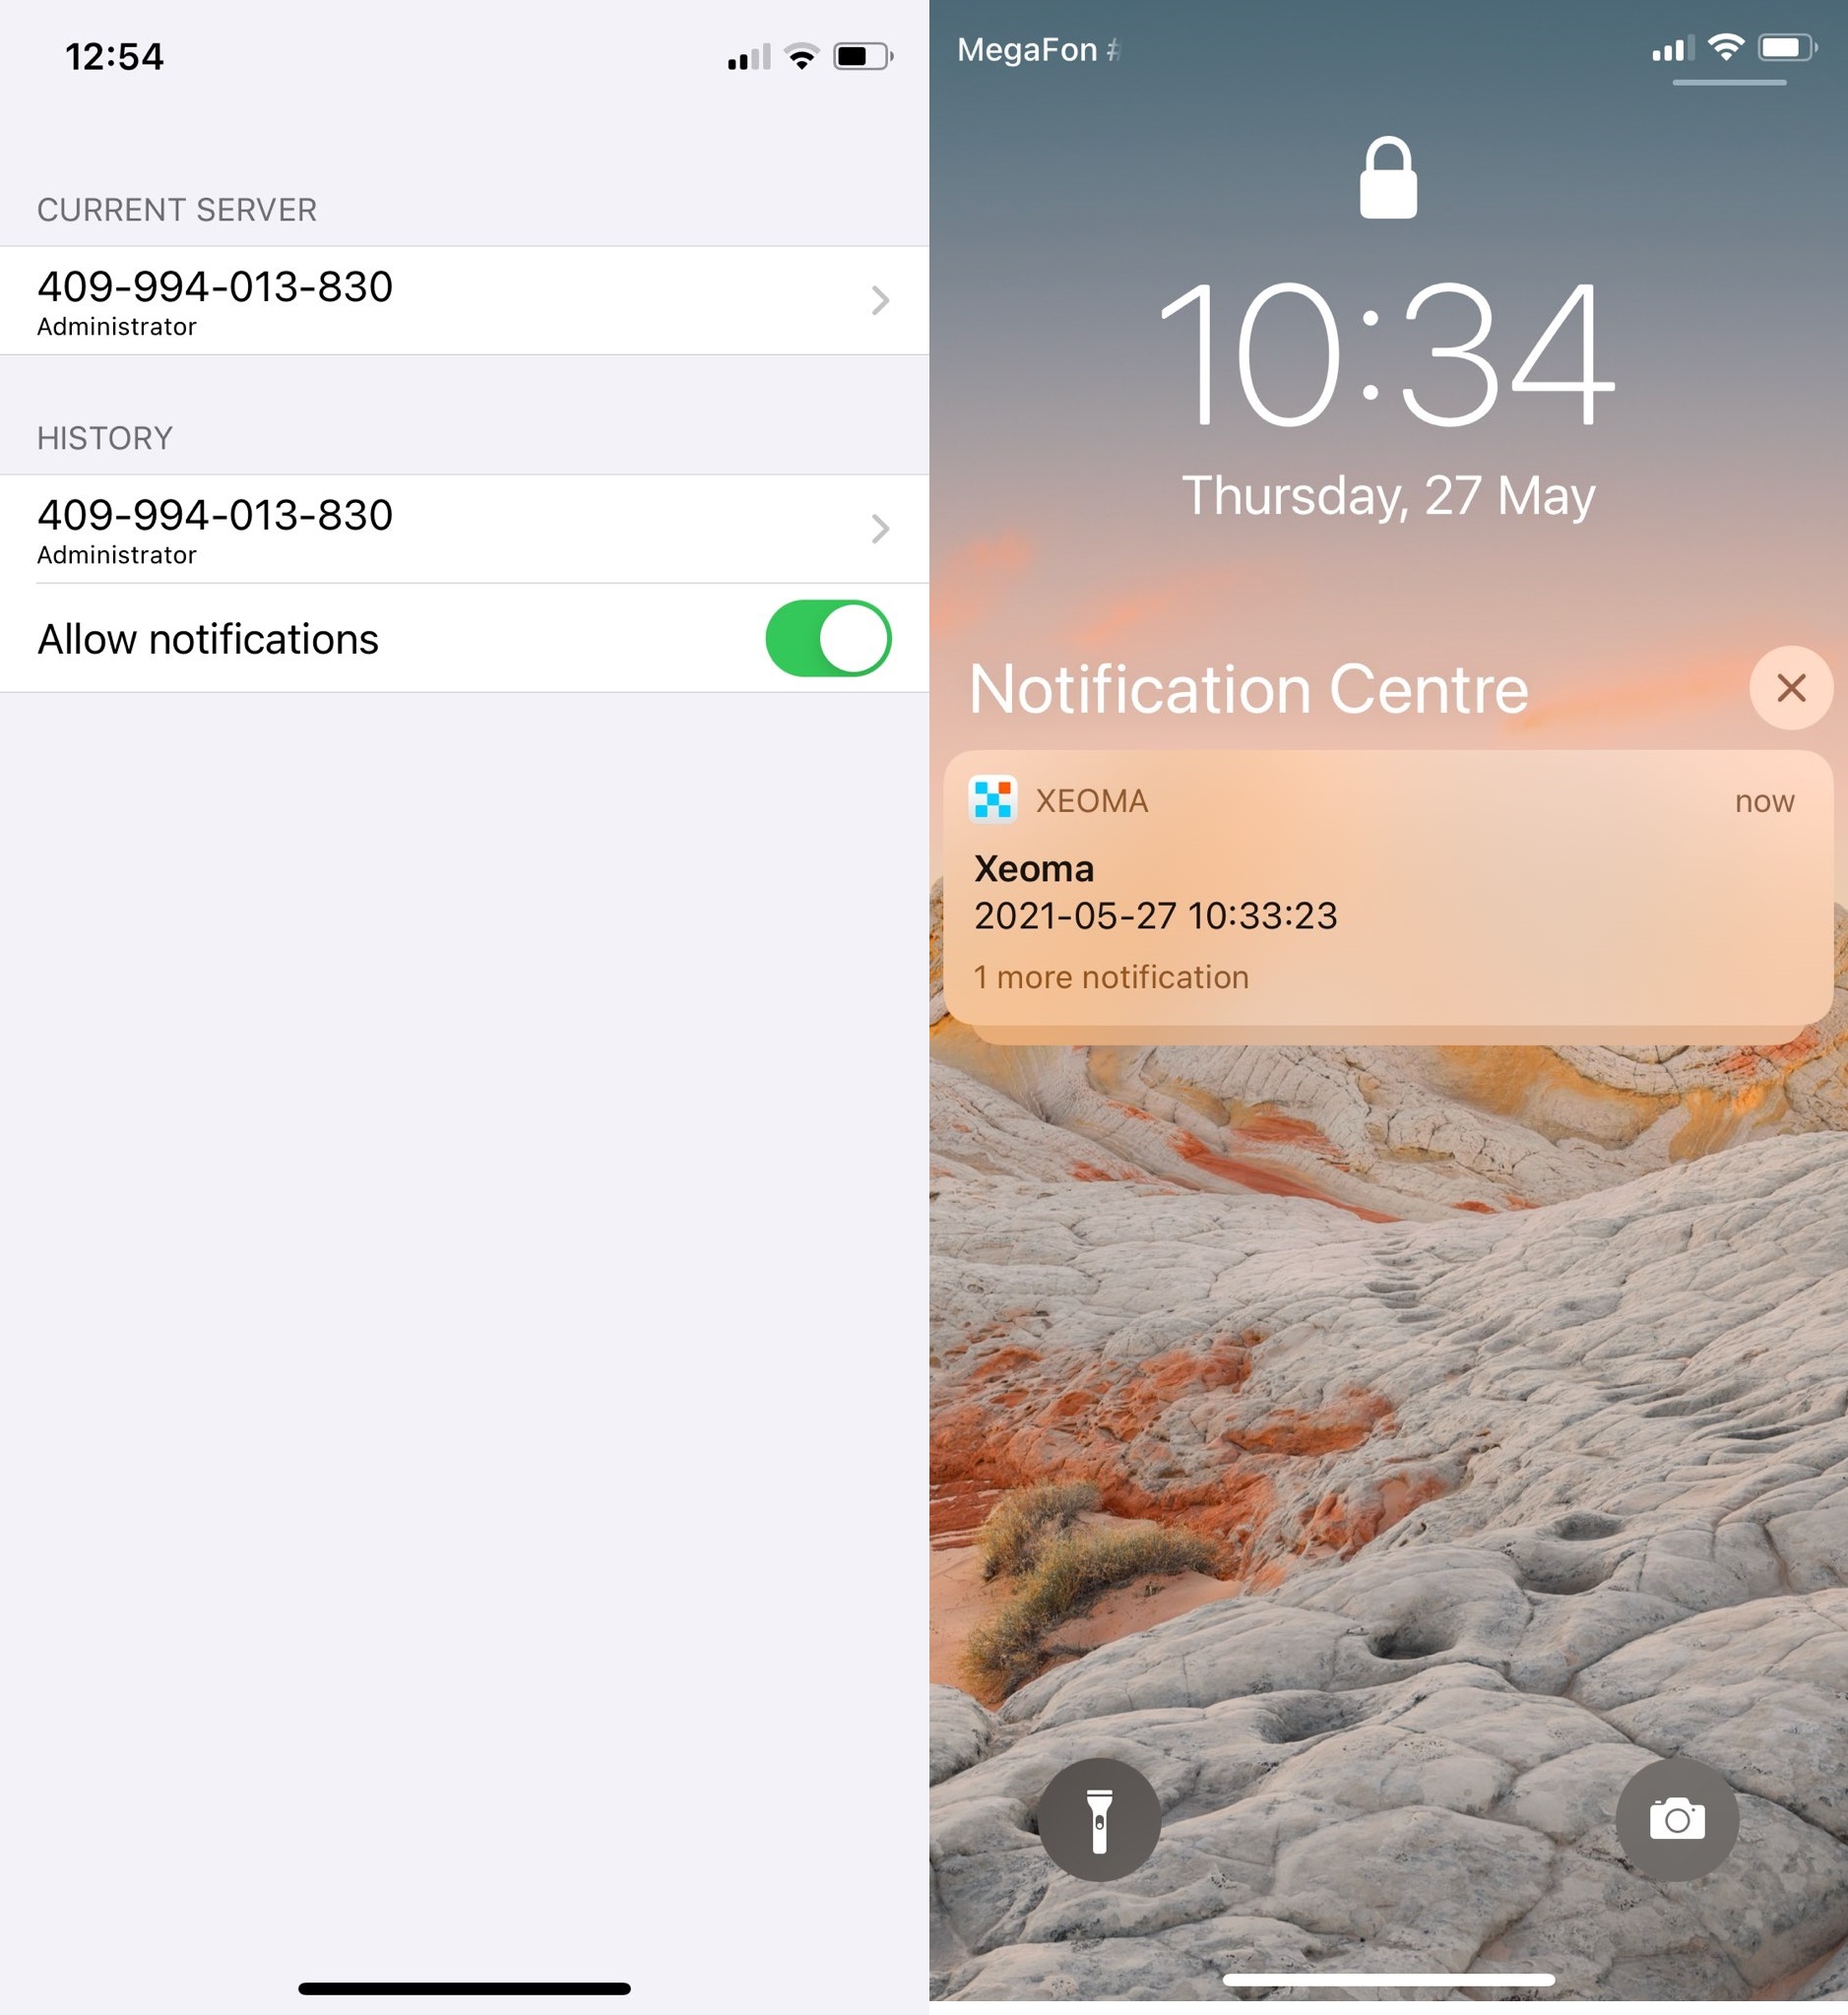 Mobile notifications on iOS devices